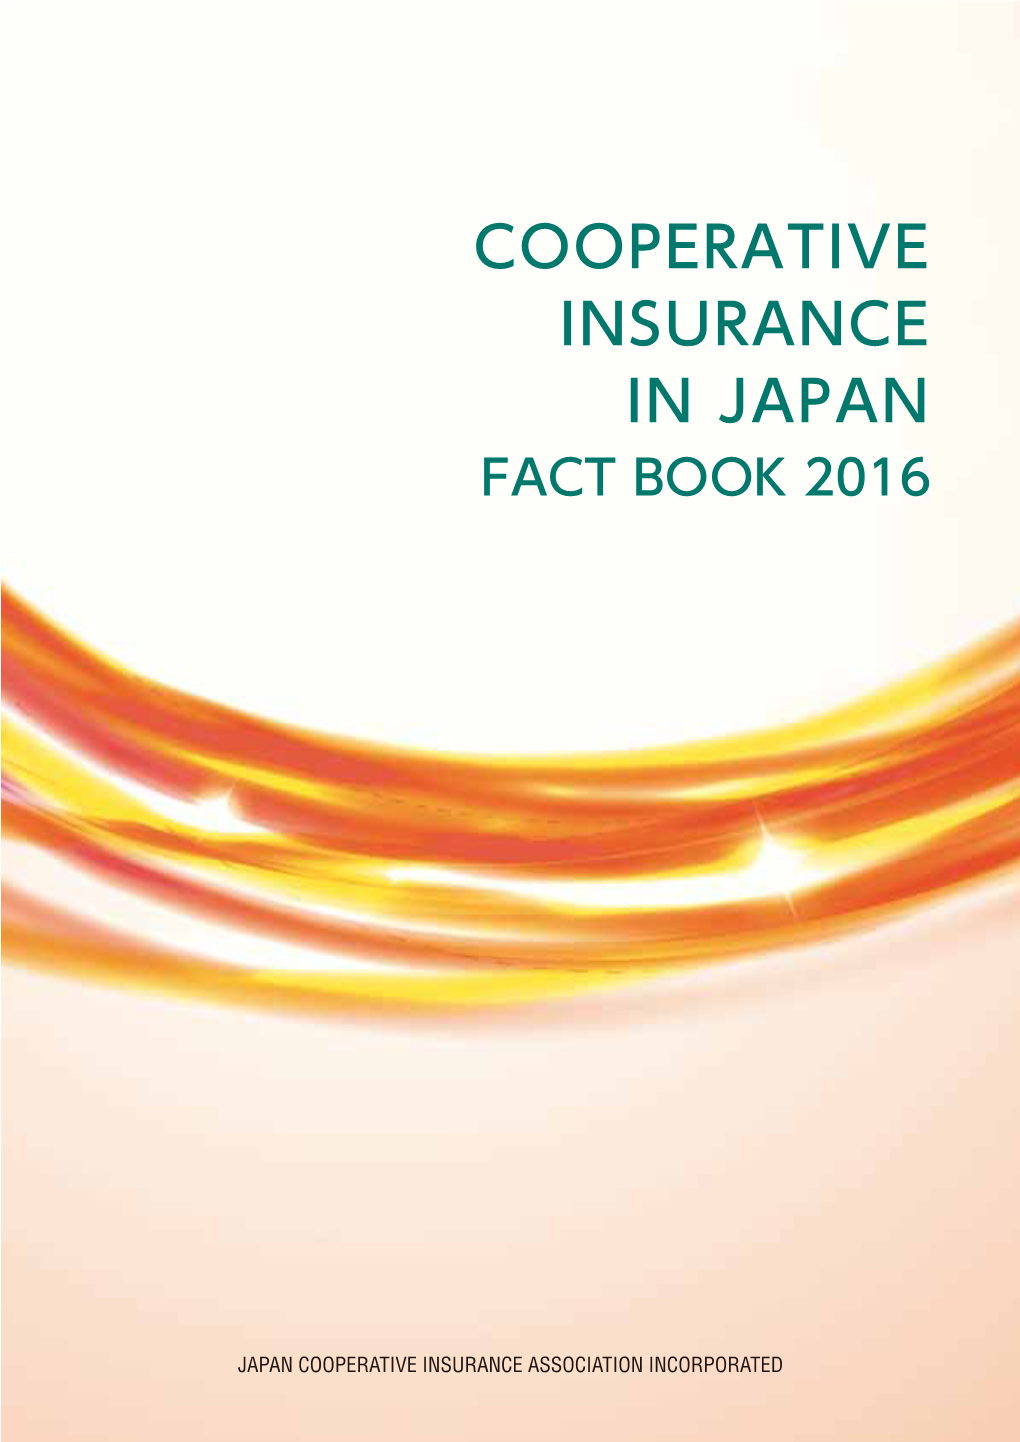 Cooperative Insurance in Japan Fact Book 2016